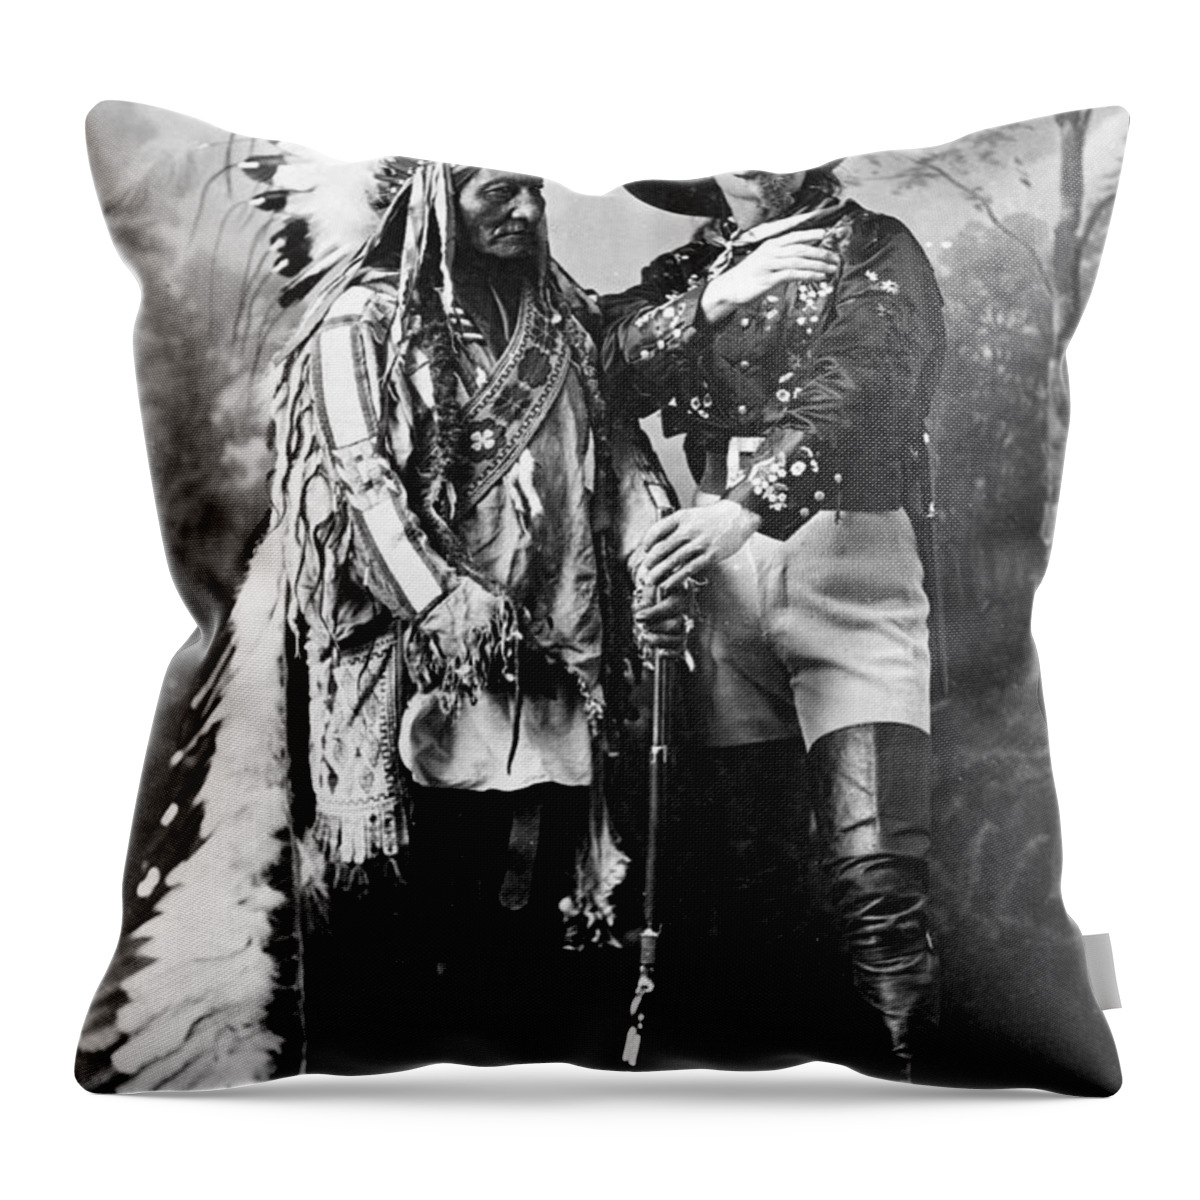 History Throw Pillow featuring the photograph Sitting Bull And Buffalo Bill, 1885 by Science Source